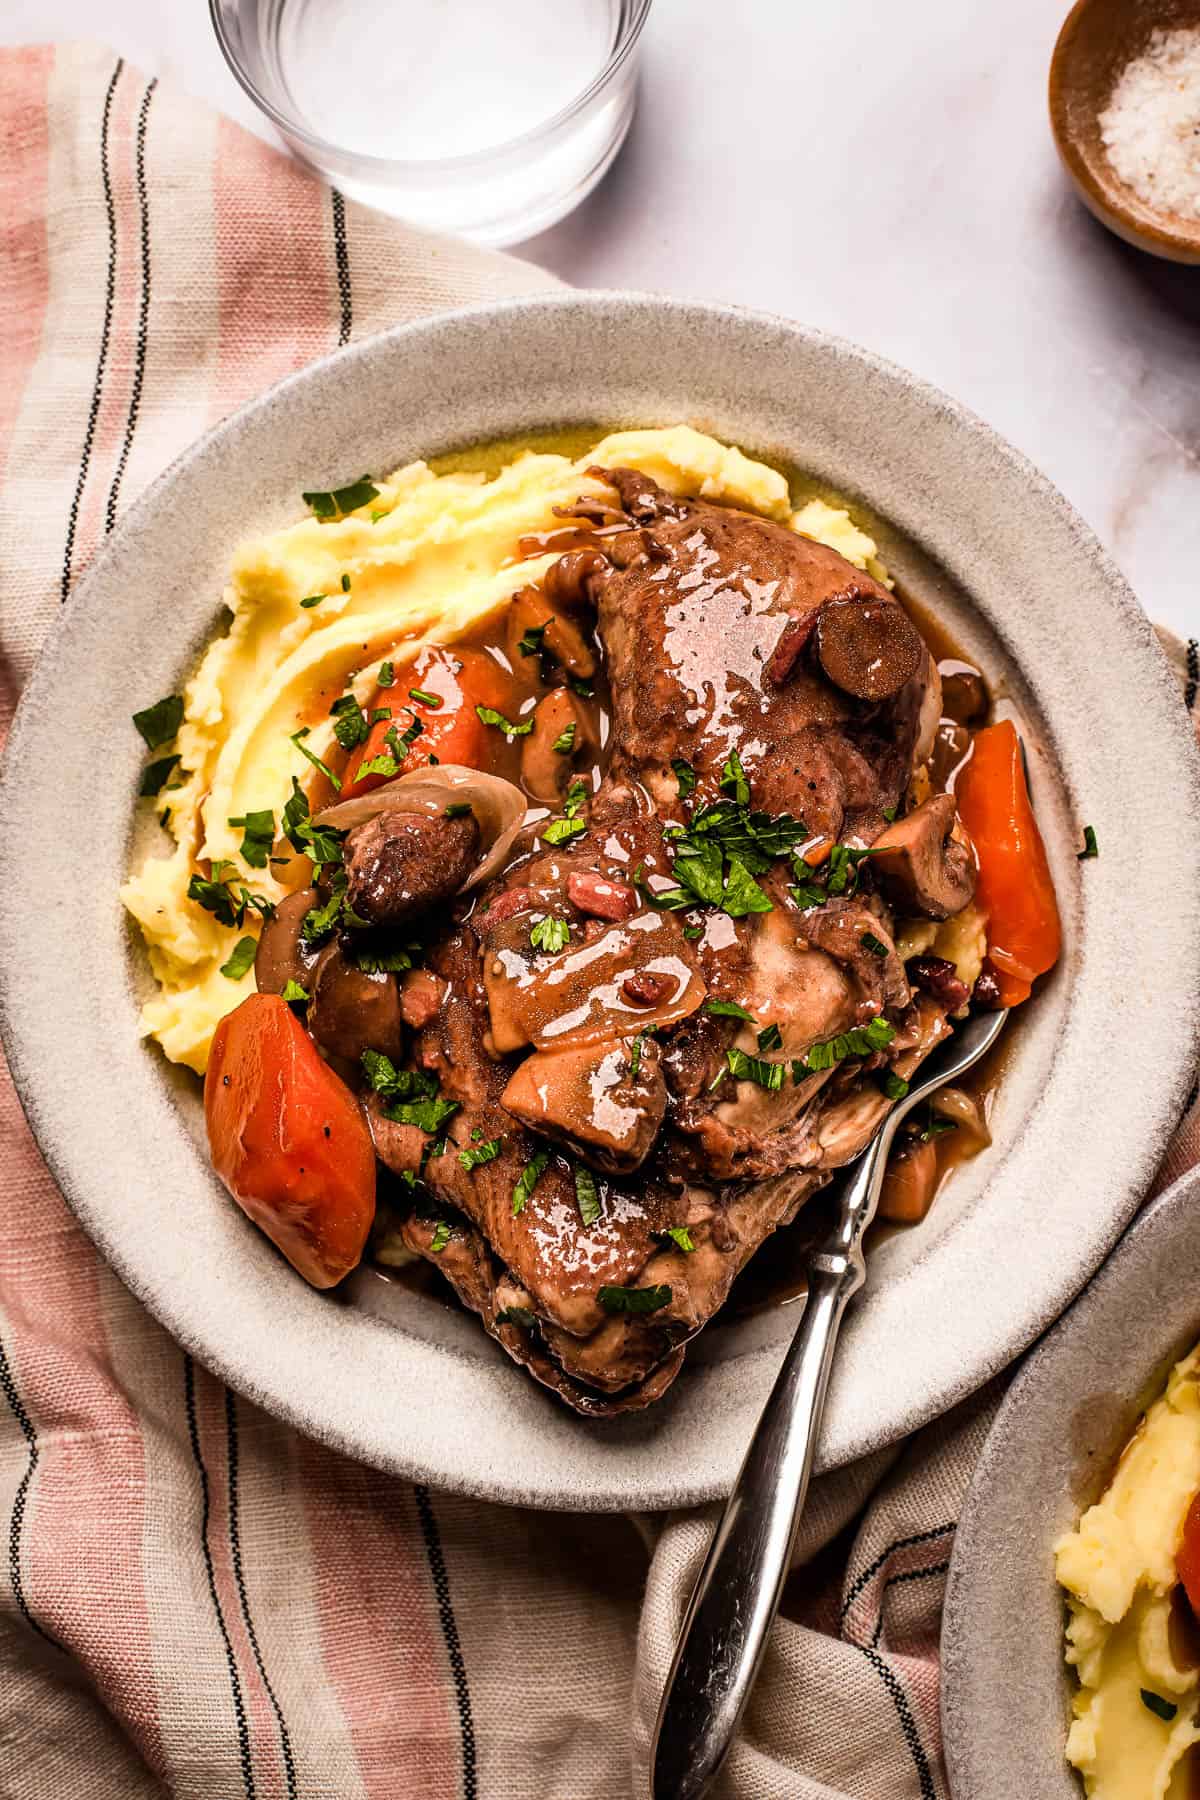 A portion of coq au vin with mashed potatoes on a stoneware dish.